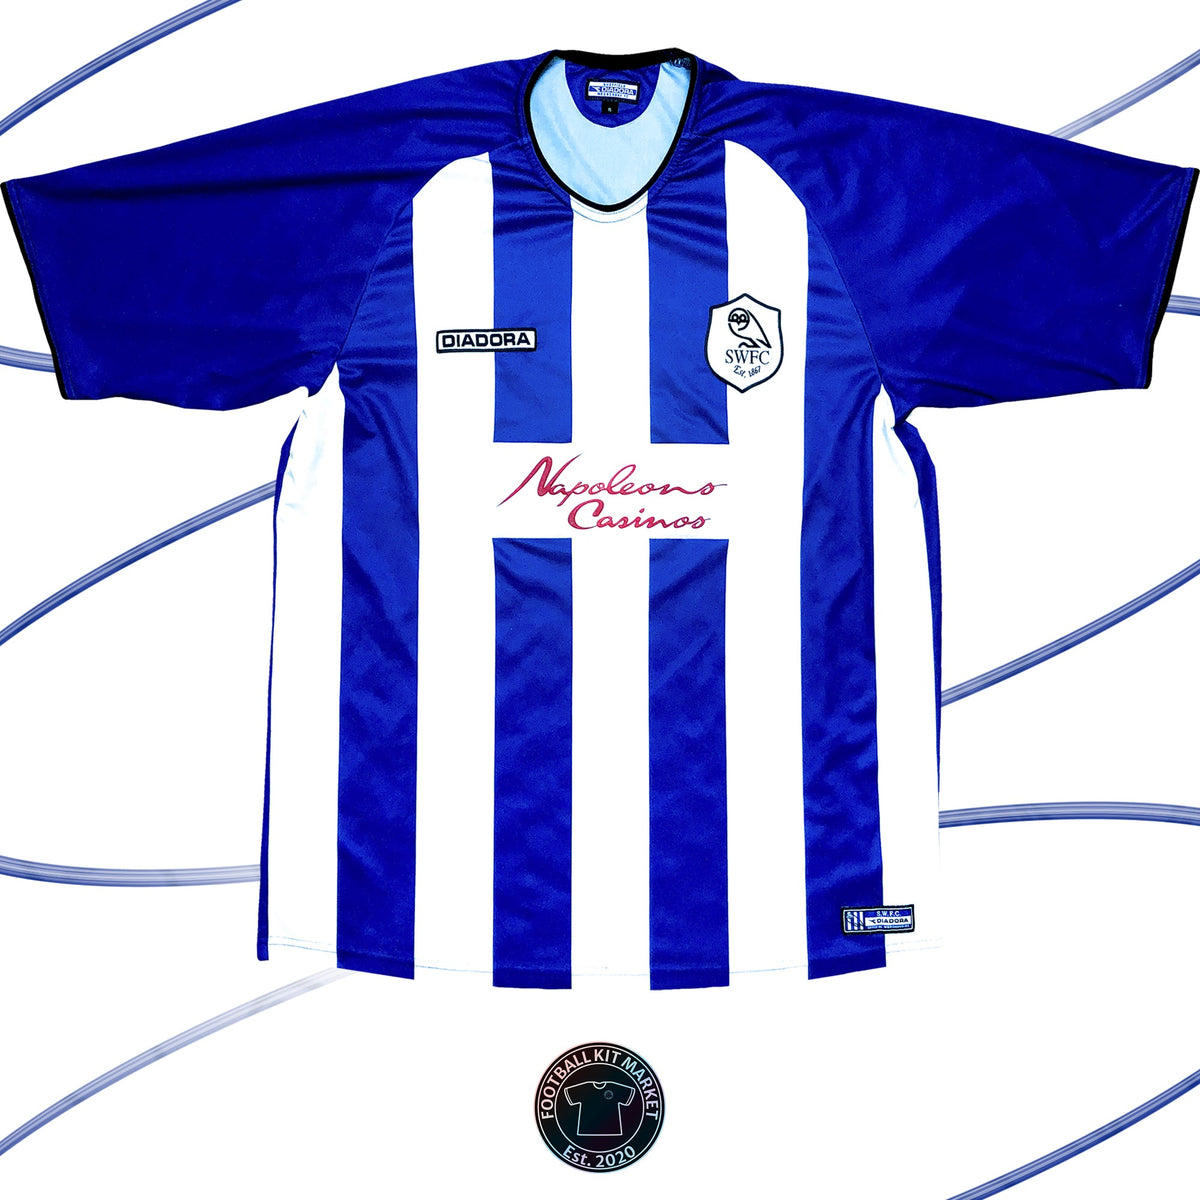 Genuine SHEFFIELD WEDNESDAY Home (2003-2005) - DIADORA (XL) - Product Image from Football Kit Market